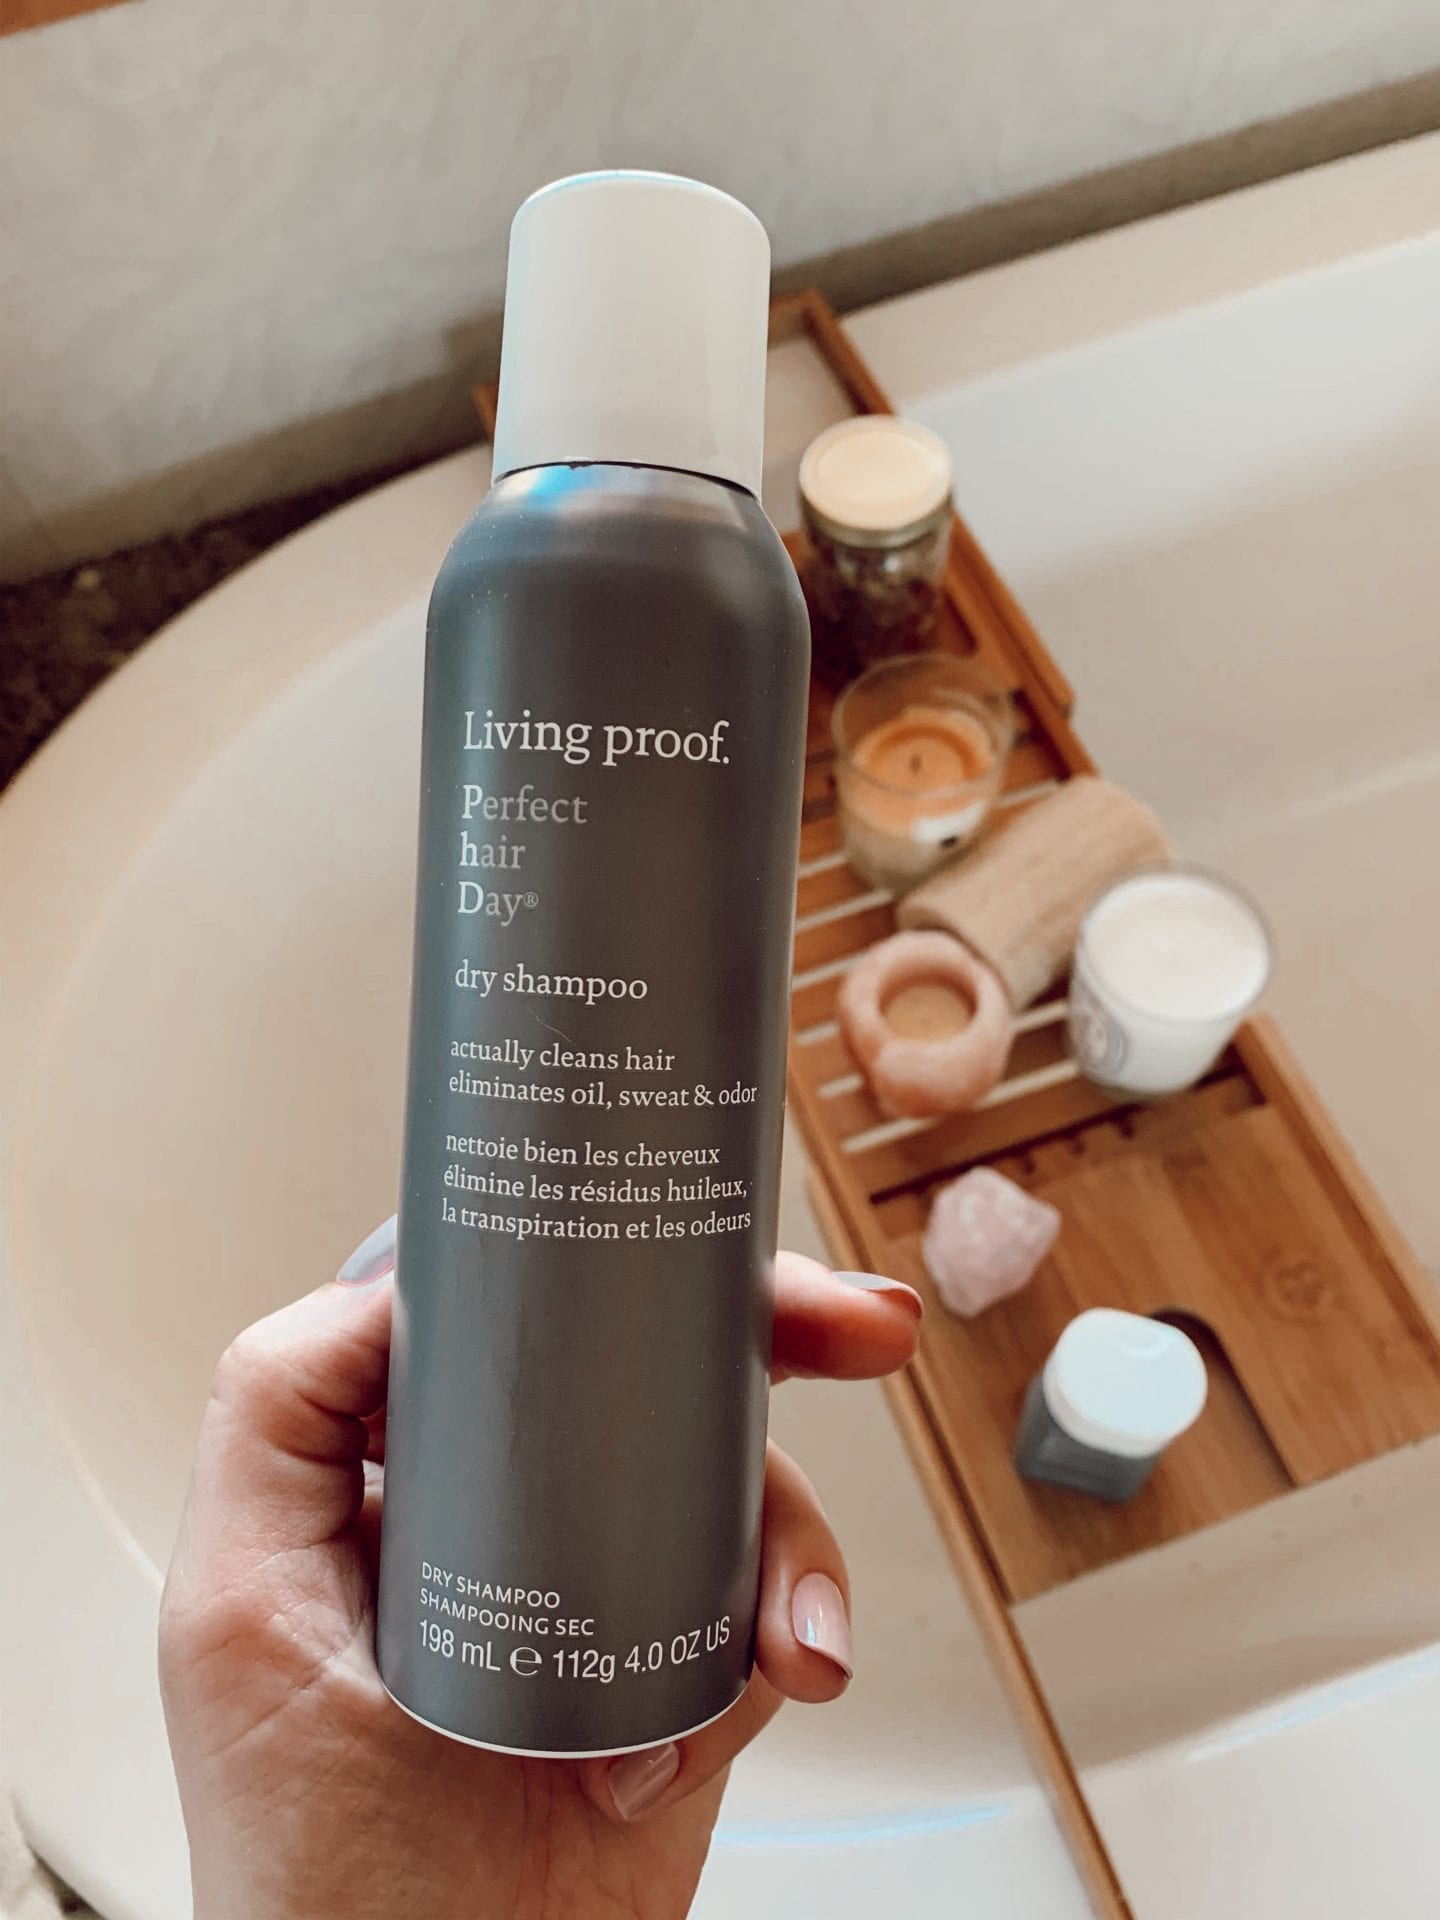 living proof hair | Living Proof Hair Products by popular San Francisco lifestyle blog, Just Add Glam: image of a woman holding a bottle of Living Proof dry shampoo. 